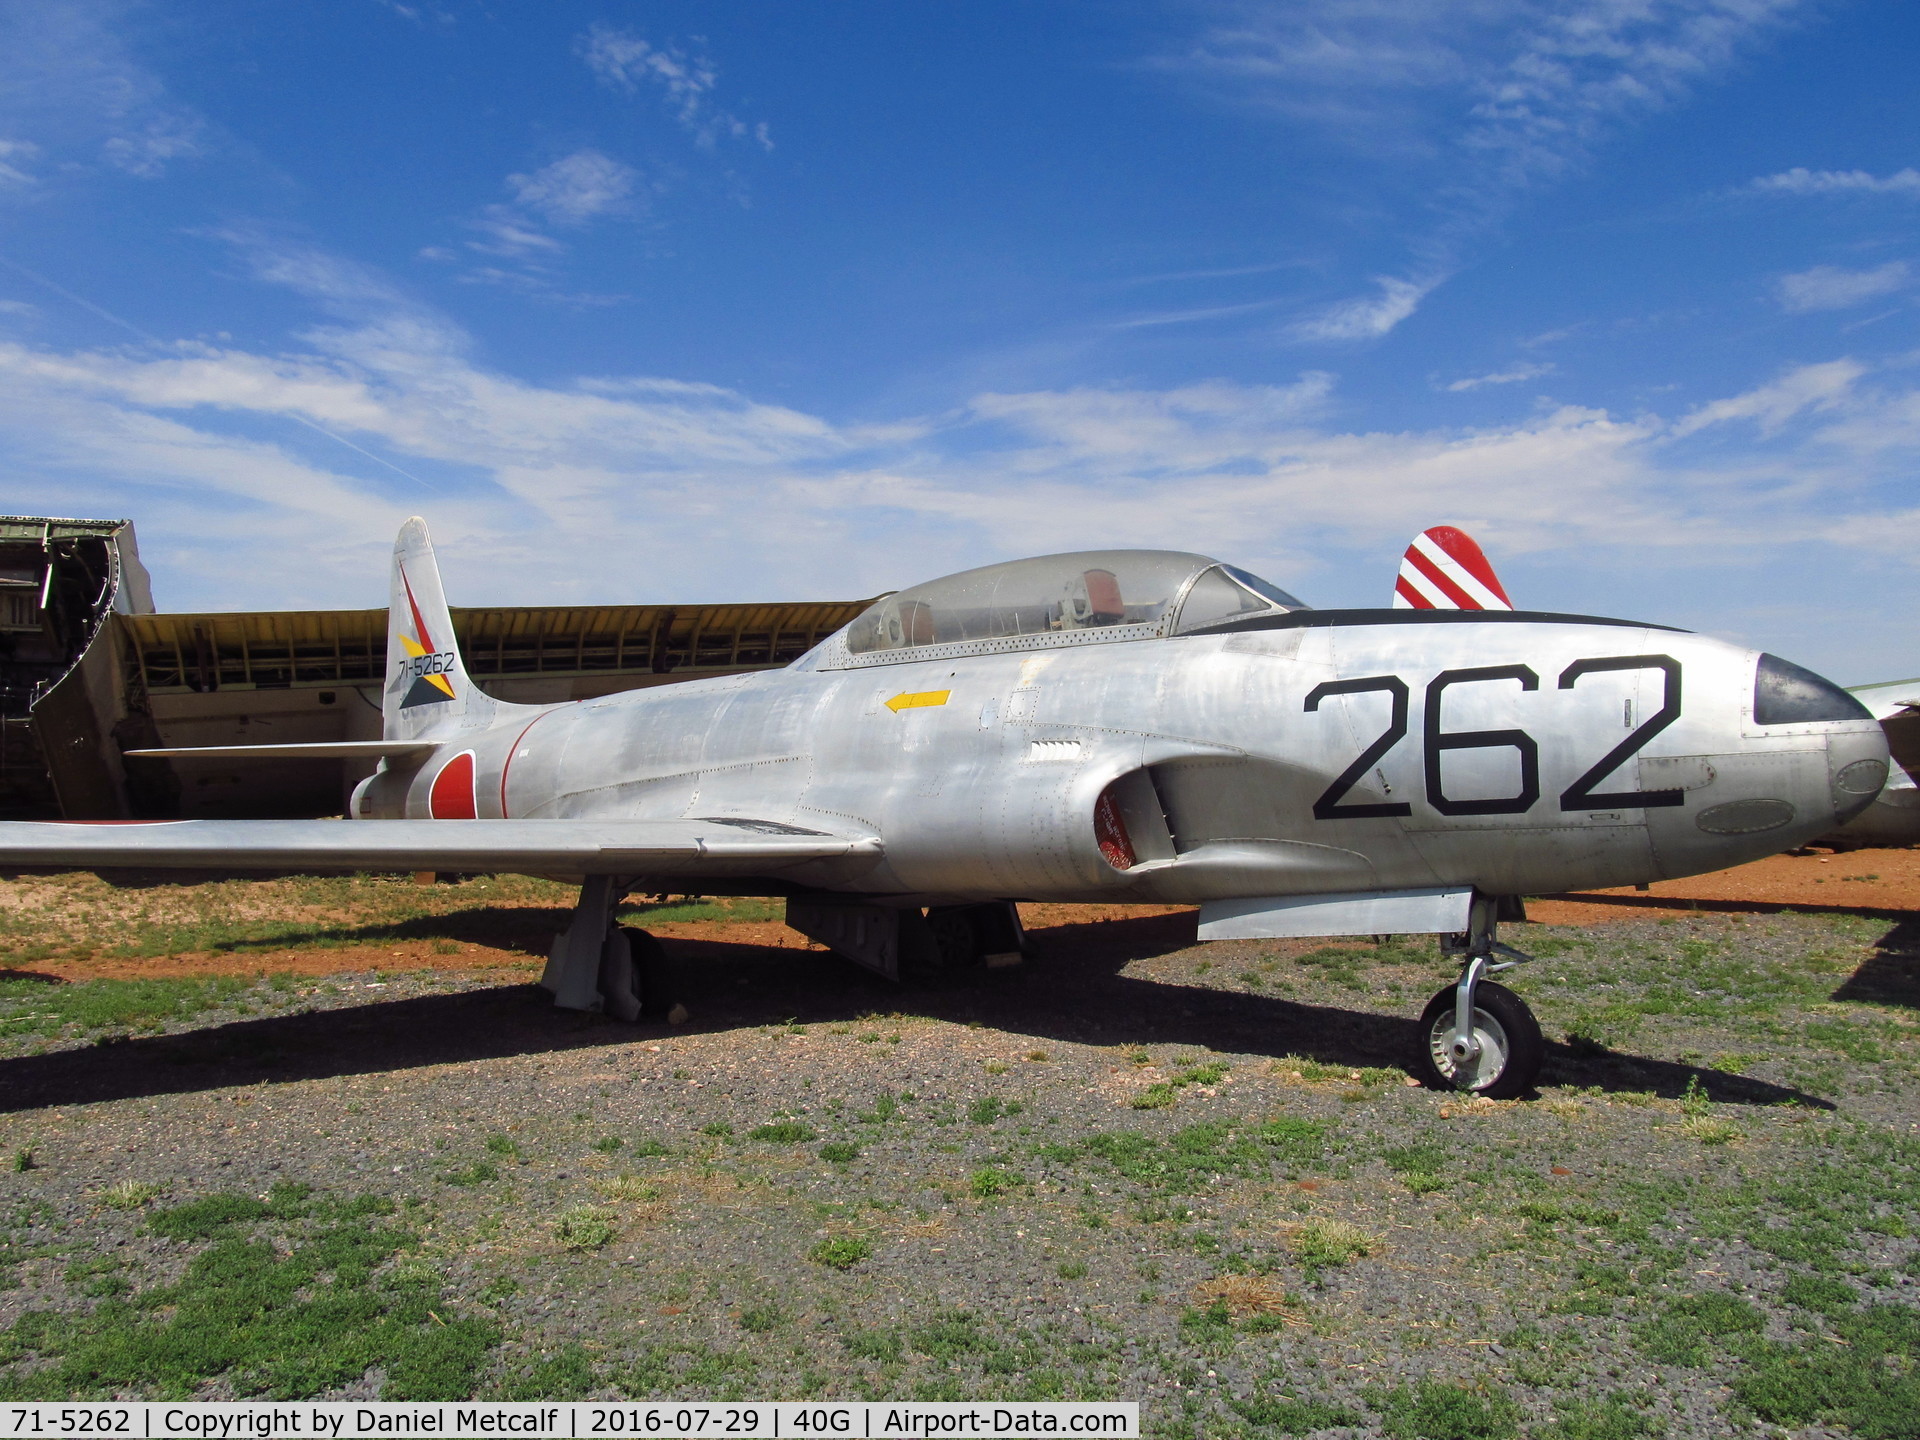 71-5262, 1953 Lockheed T-33A Shooting Star C/N KAC1062, Planes of Fame Air Museum (Valle-Williams, AZ Location)